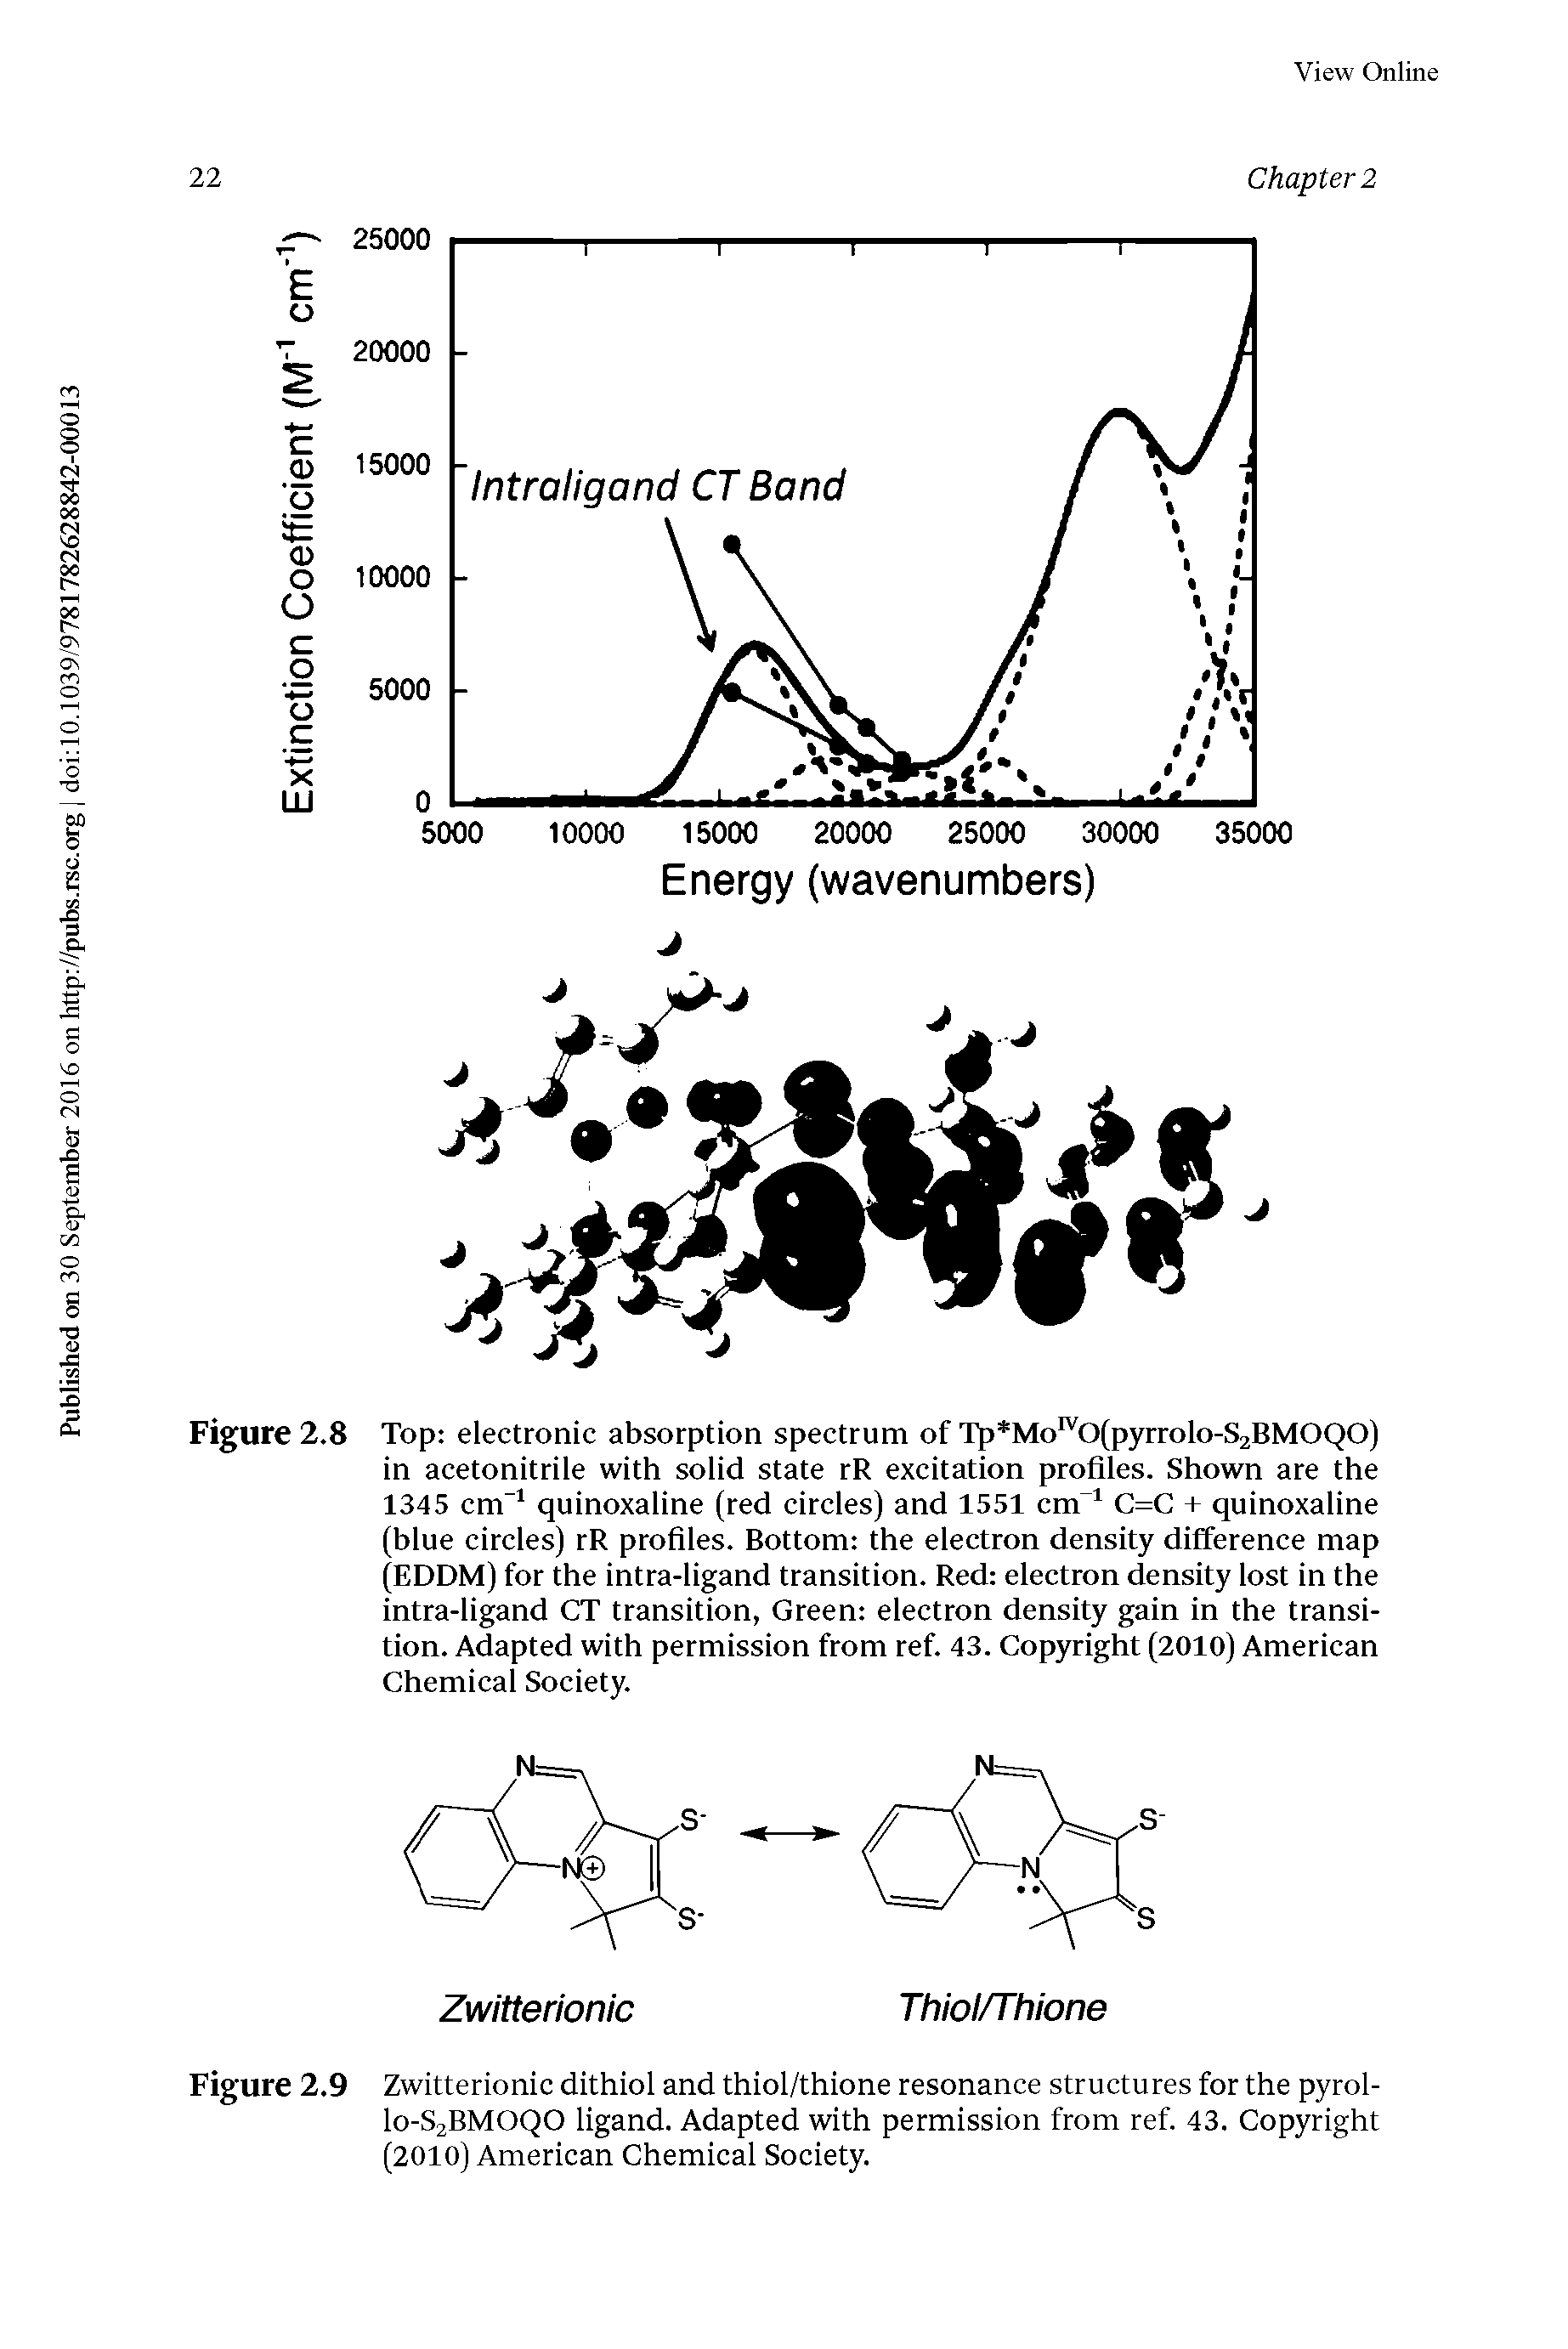 Figure 2.8 Top electronic absorption spectrum of Tp Mo 0(pyrrolo-S2BMOQO) in acetonitrile with solid state rR excitation profiles. Shown are the 1345 cm quinoxaline (red circles) and 1551 cm C=C + quinoxaline (blue circles) rR profiles. Bottom the electron density difference map (EDDM) for the intra-ligand transition. Red electron density lost in the intra-ligand CT transition, Green electron density gain in the transition. Adapted with permission from ref. 43. Copyright (2010) American Chemical Society.